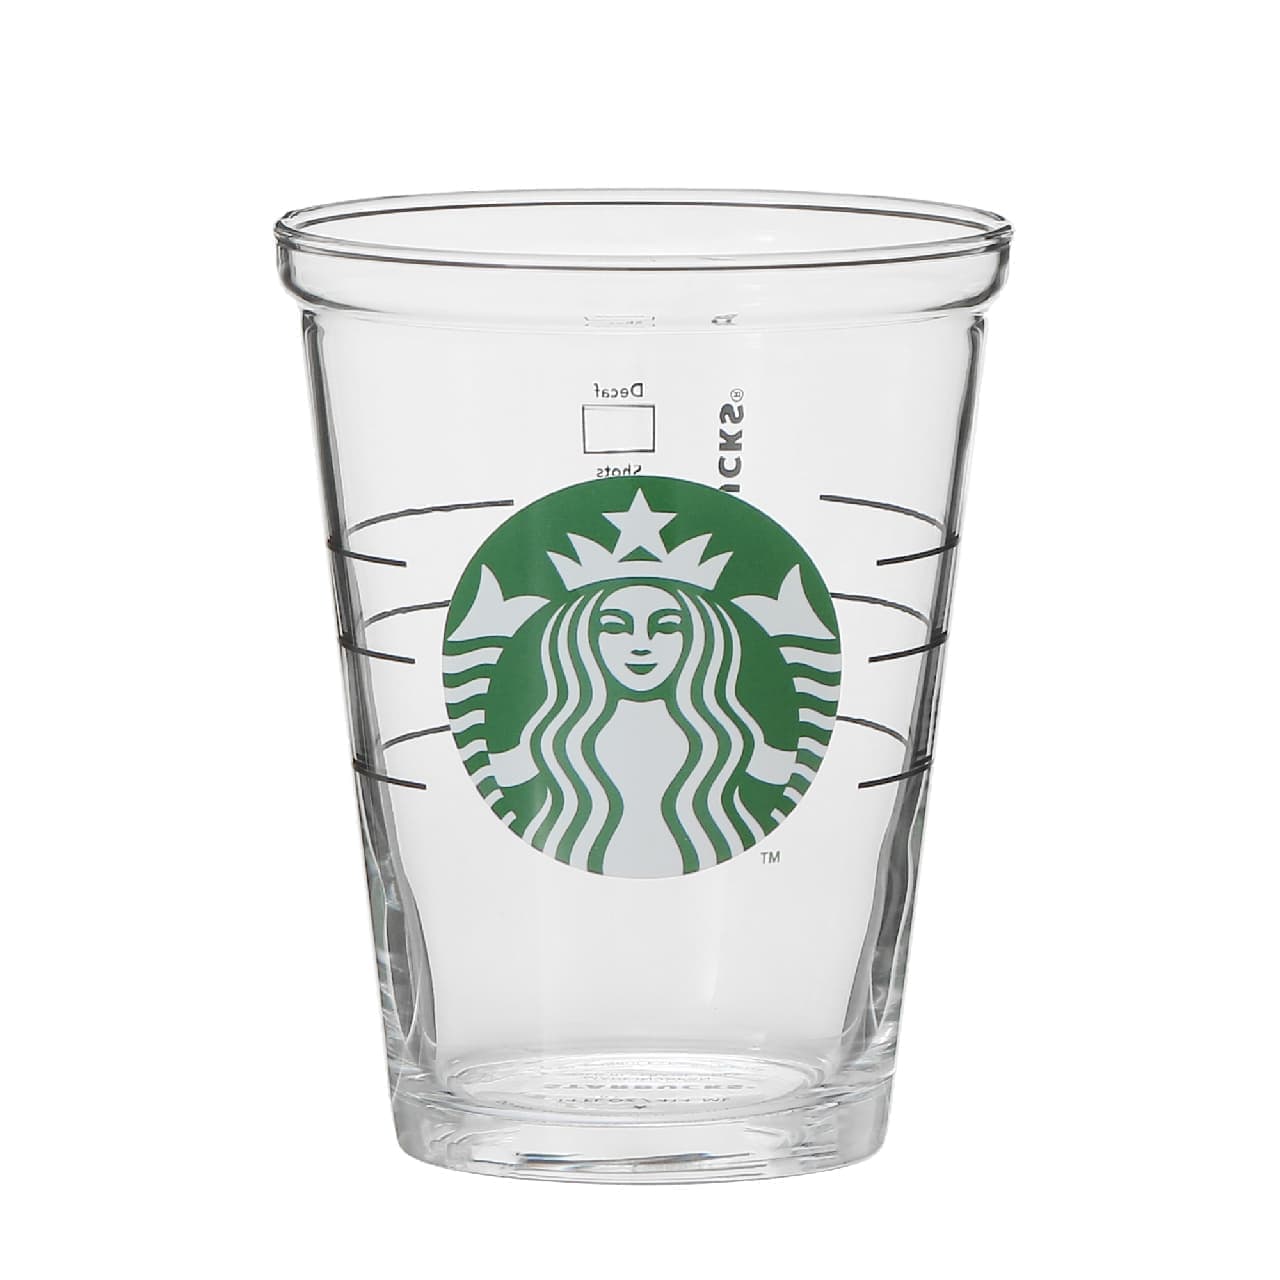 Starbucks cold cup glasses, stainless steel mini bottles, reusable straws & silicone cases, etc.